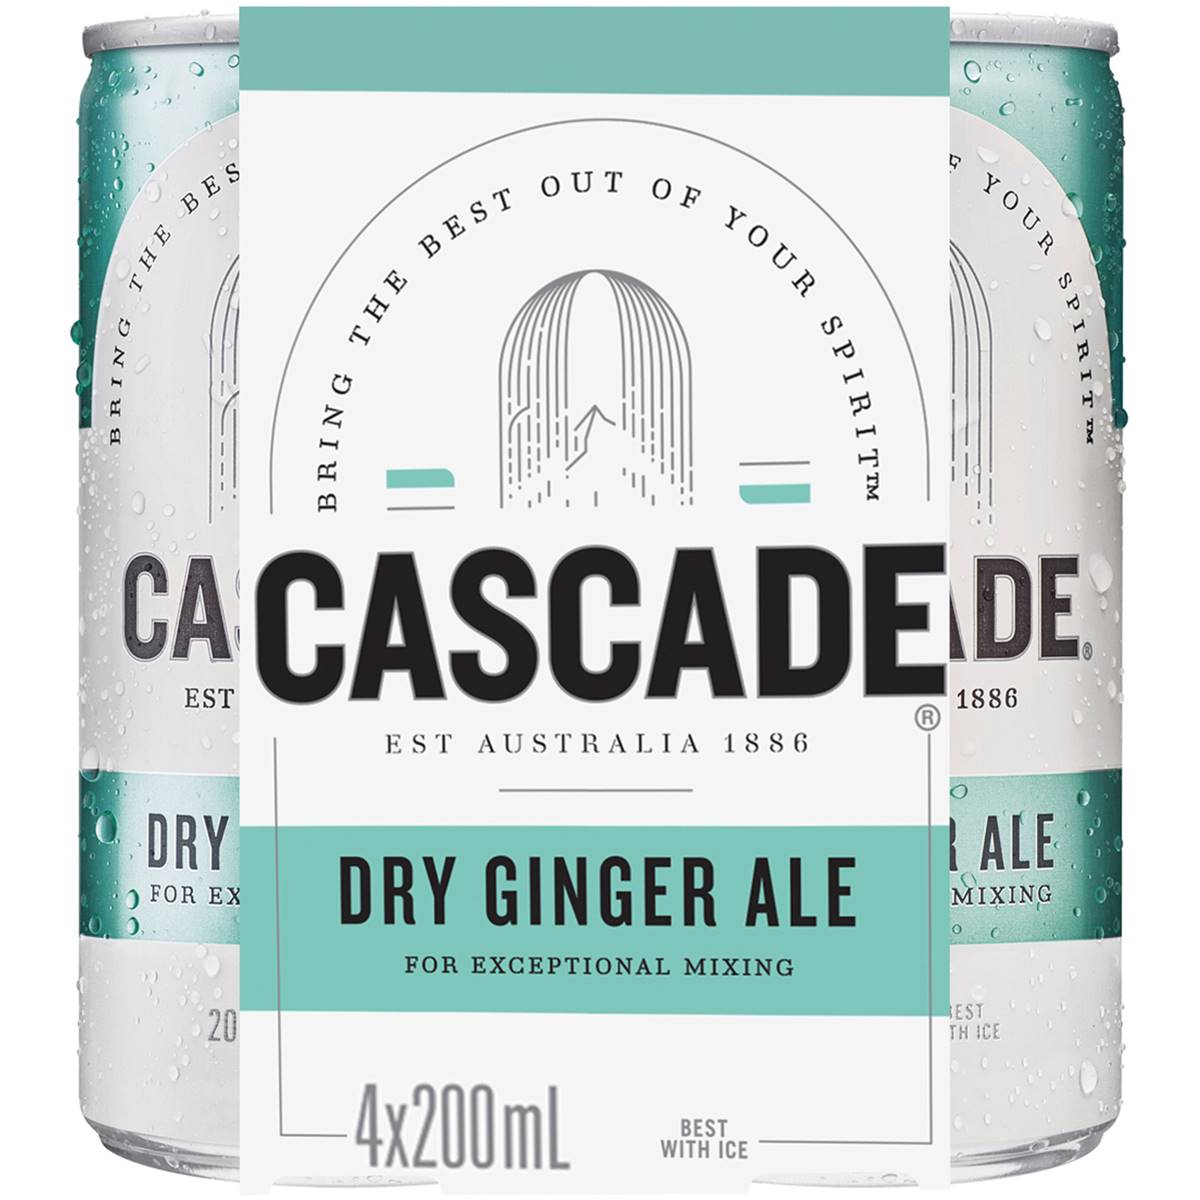 Calories in Cascade Dry Ginger Ale Cans